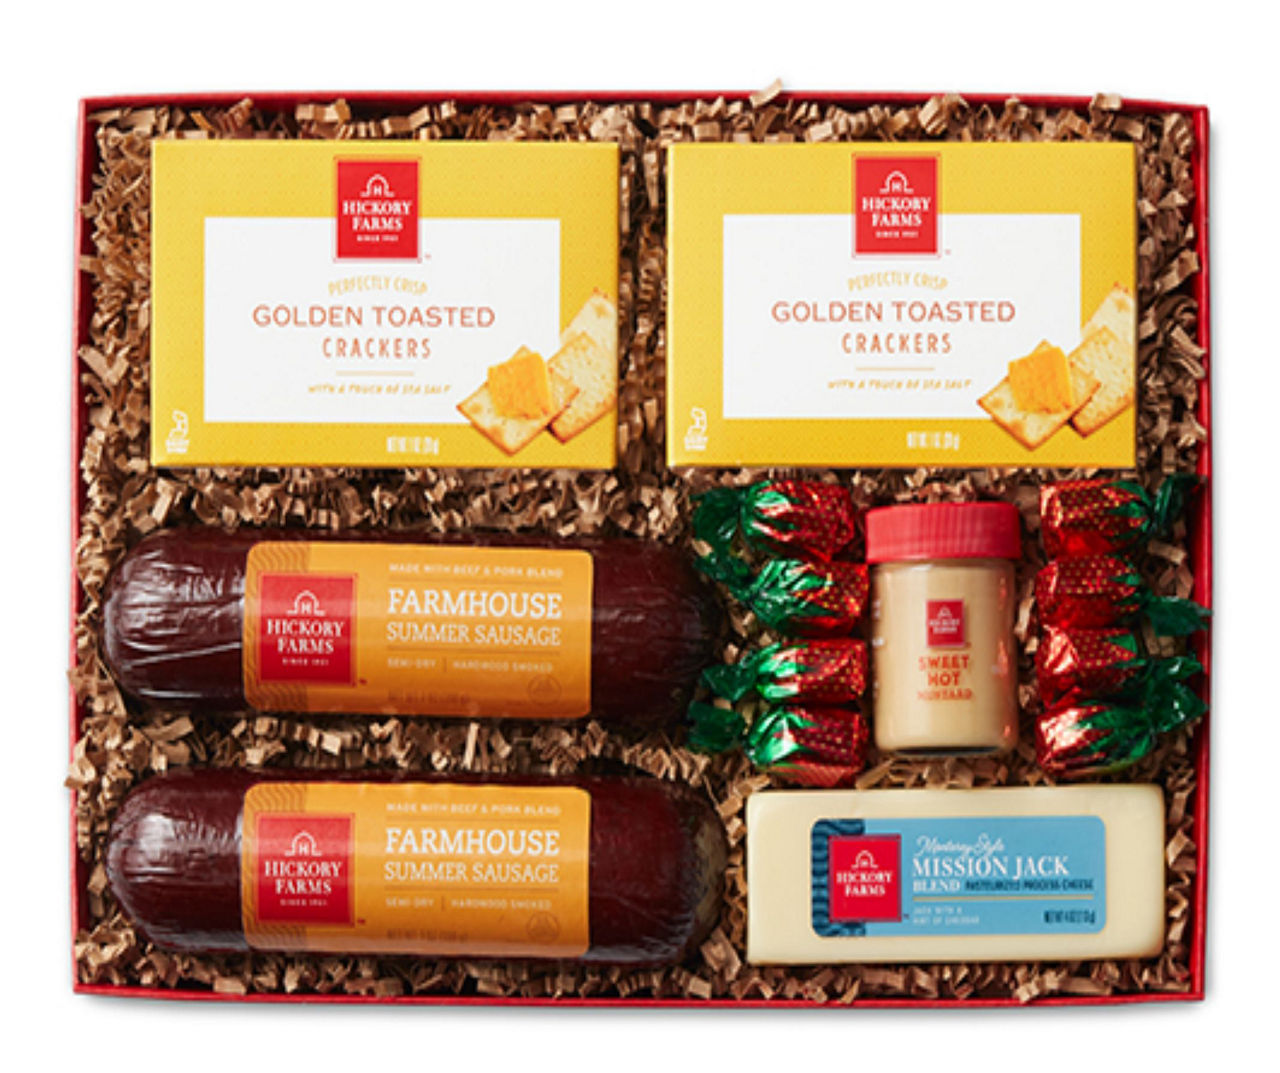 Hickory Farms Holiday Celebration Meat & Cheese Food Gift Set, 23.2 Oz.